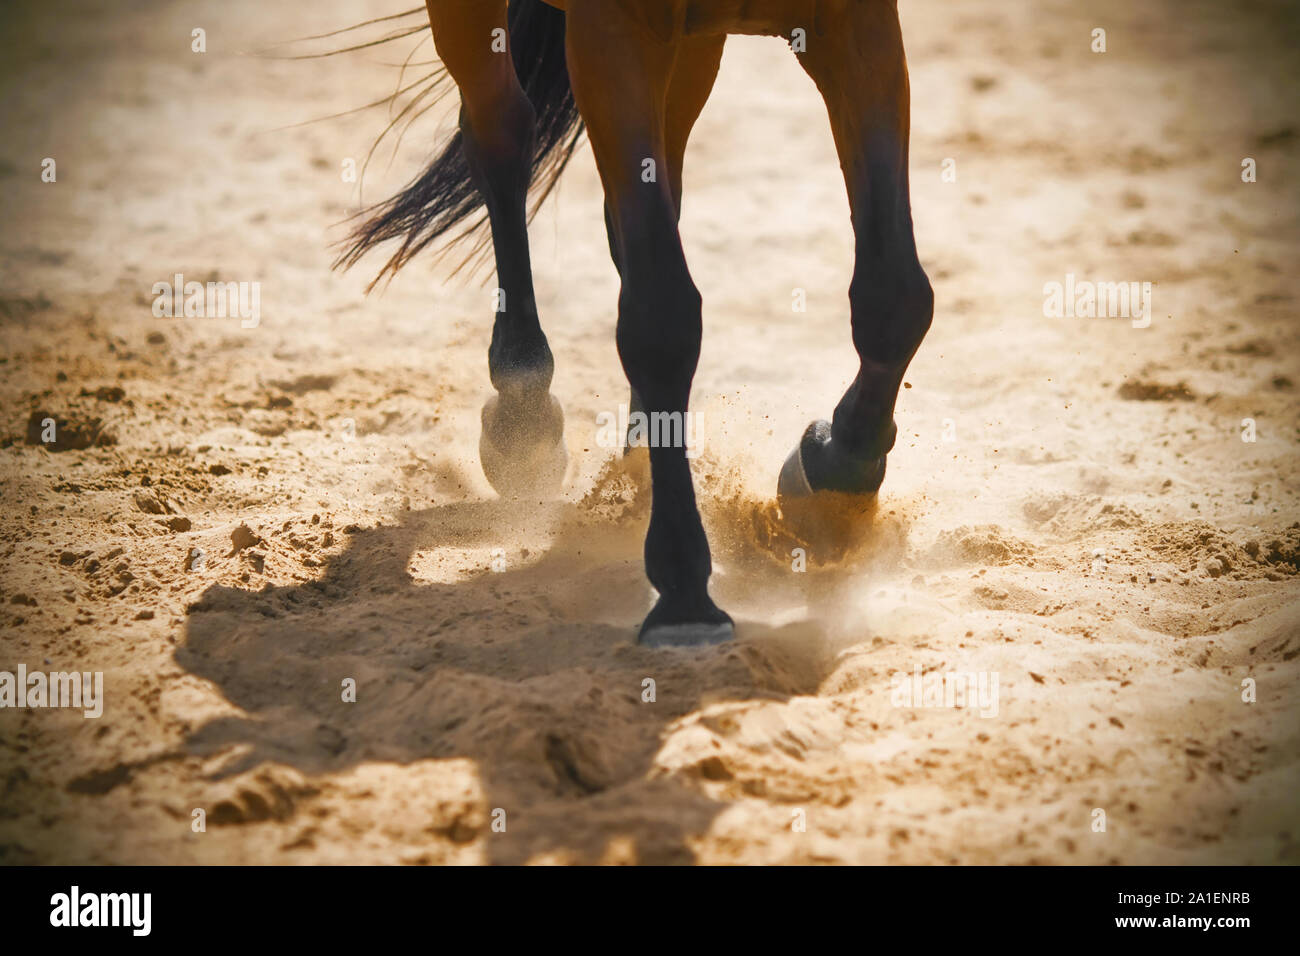 The graceful legs of a Bay horse galloping across the sand, kicking up dust in the warm sunlight. Stock Photo